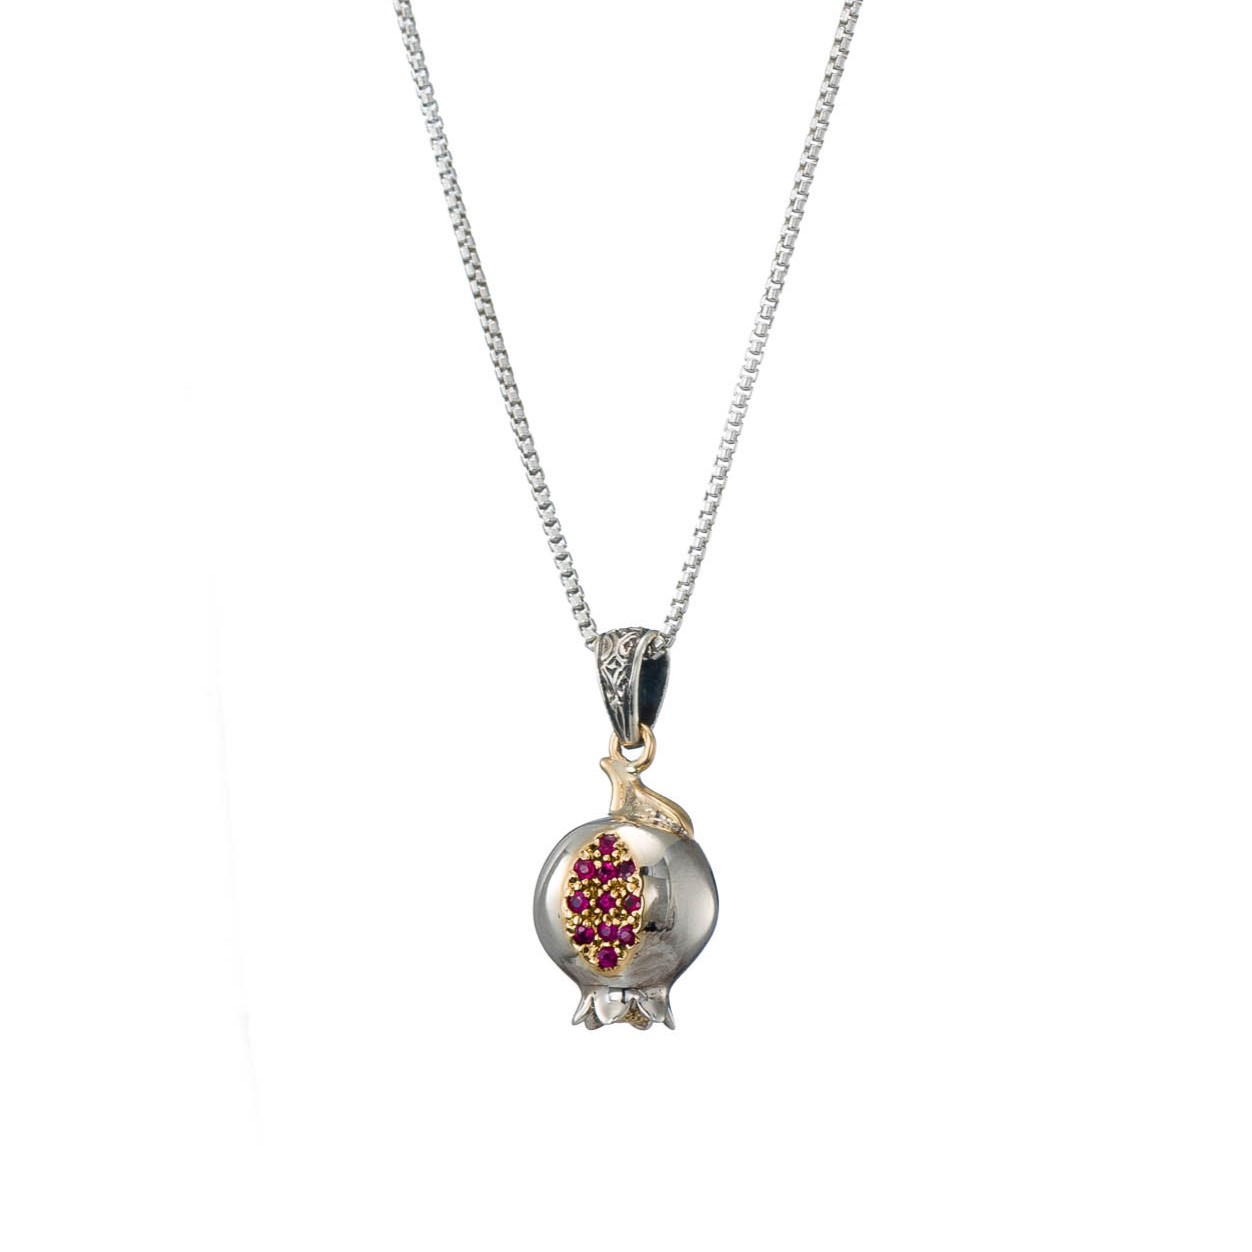 Pomegranate Pendant in 18K Gold and Sterling Silver with Rubies